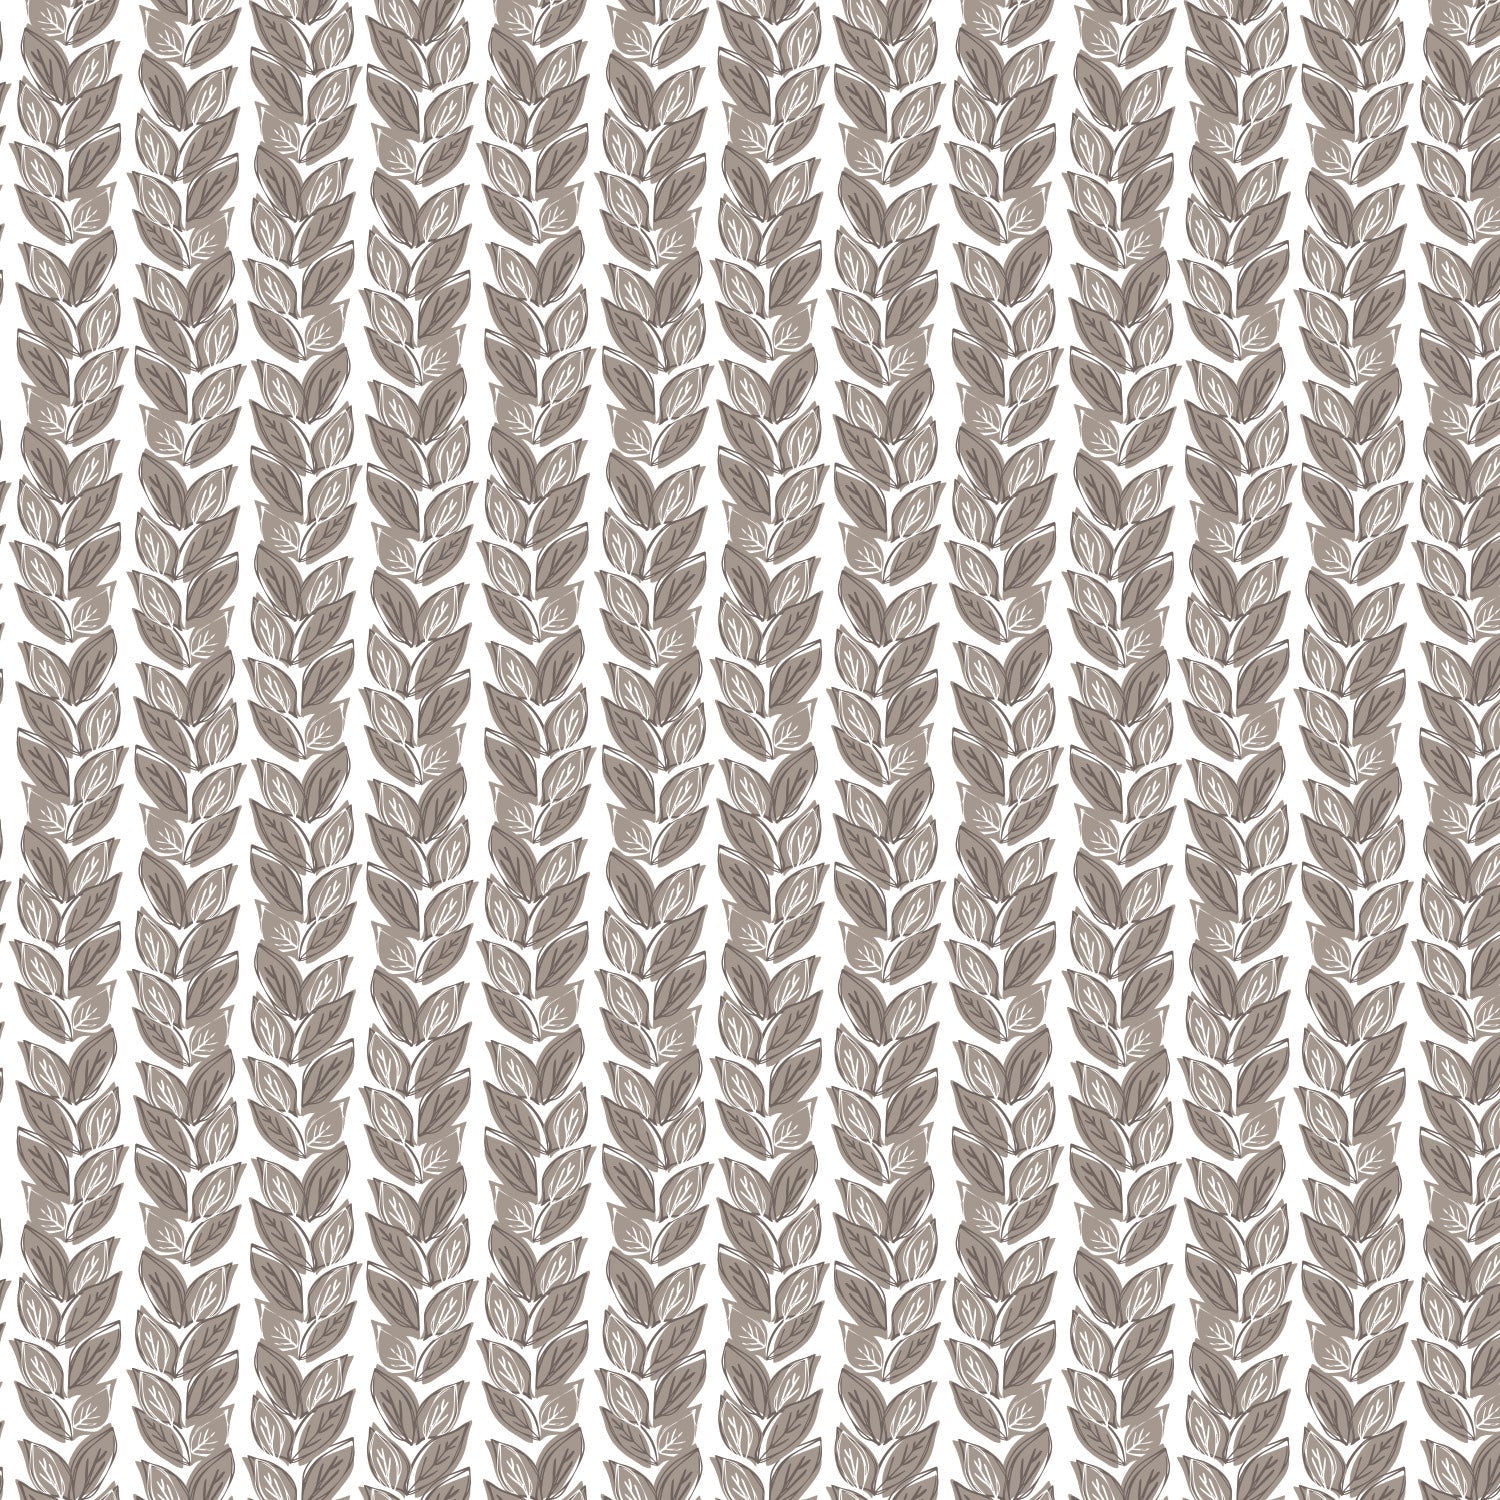 Home Collection by Vicky Yorke -Leafy - Grey - Cotton